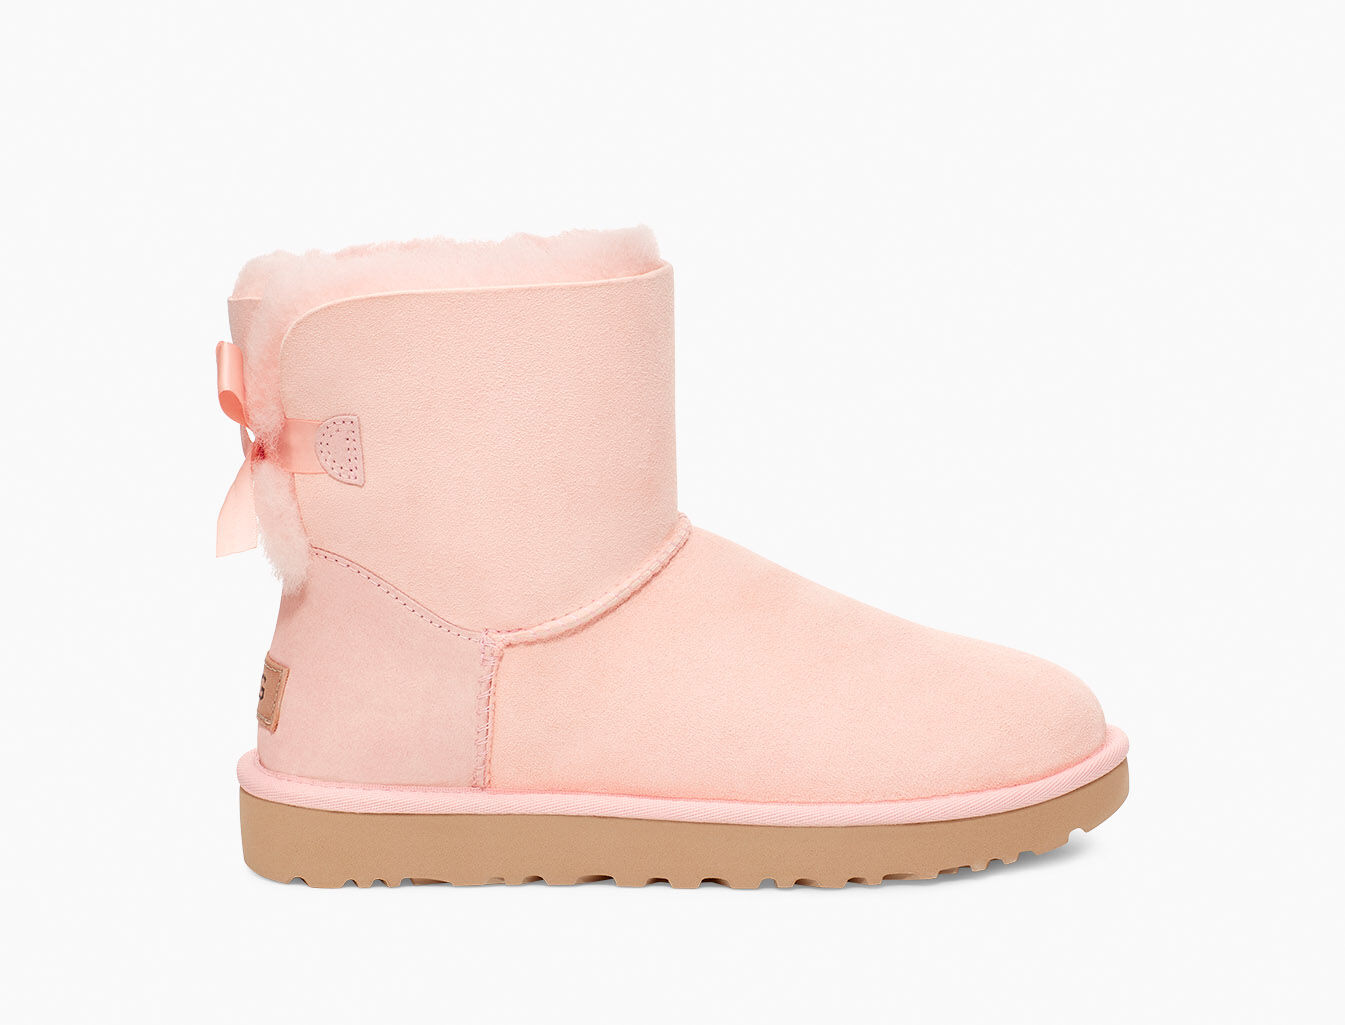 bailey bow uggs for cheap